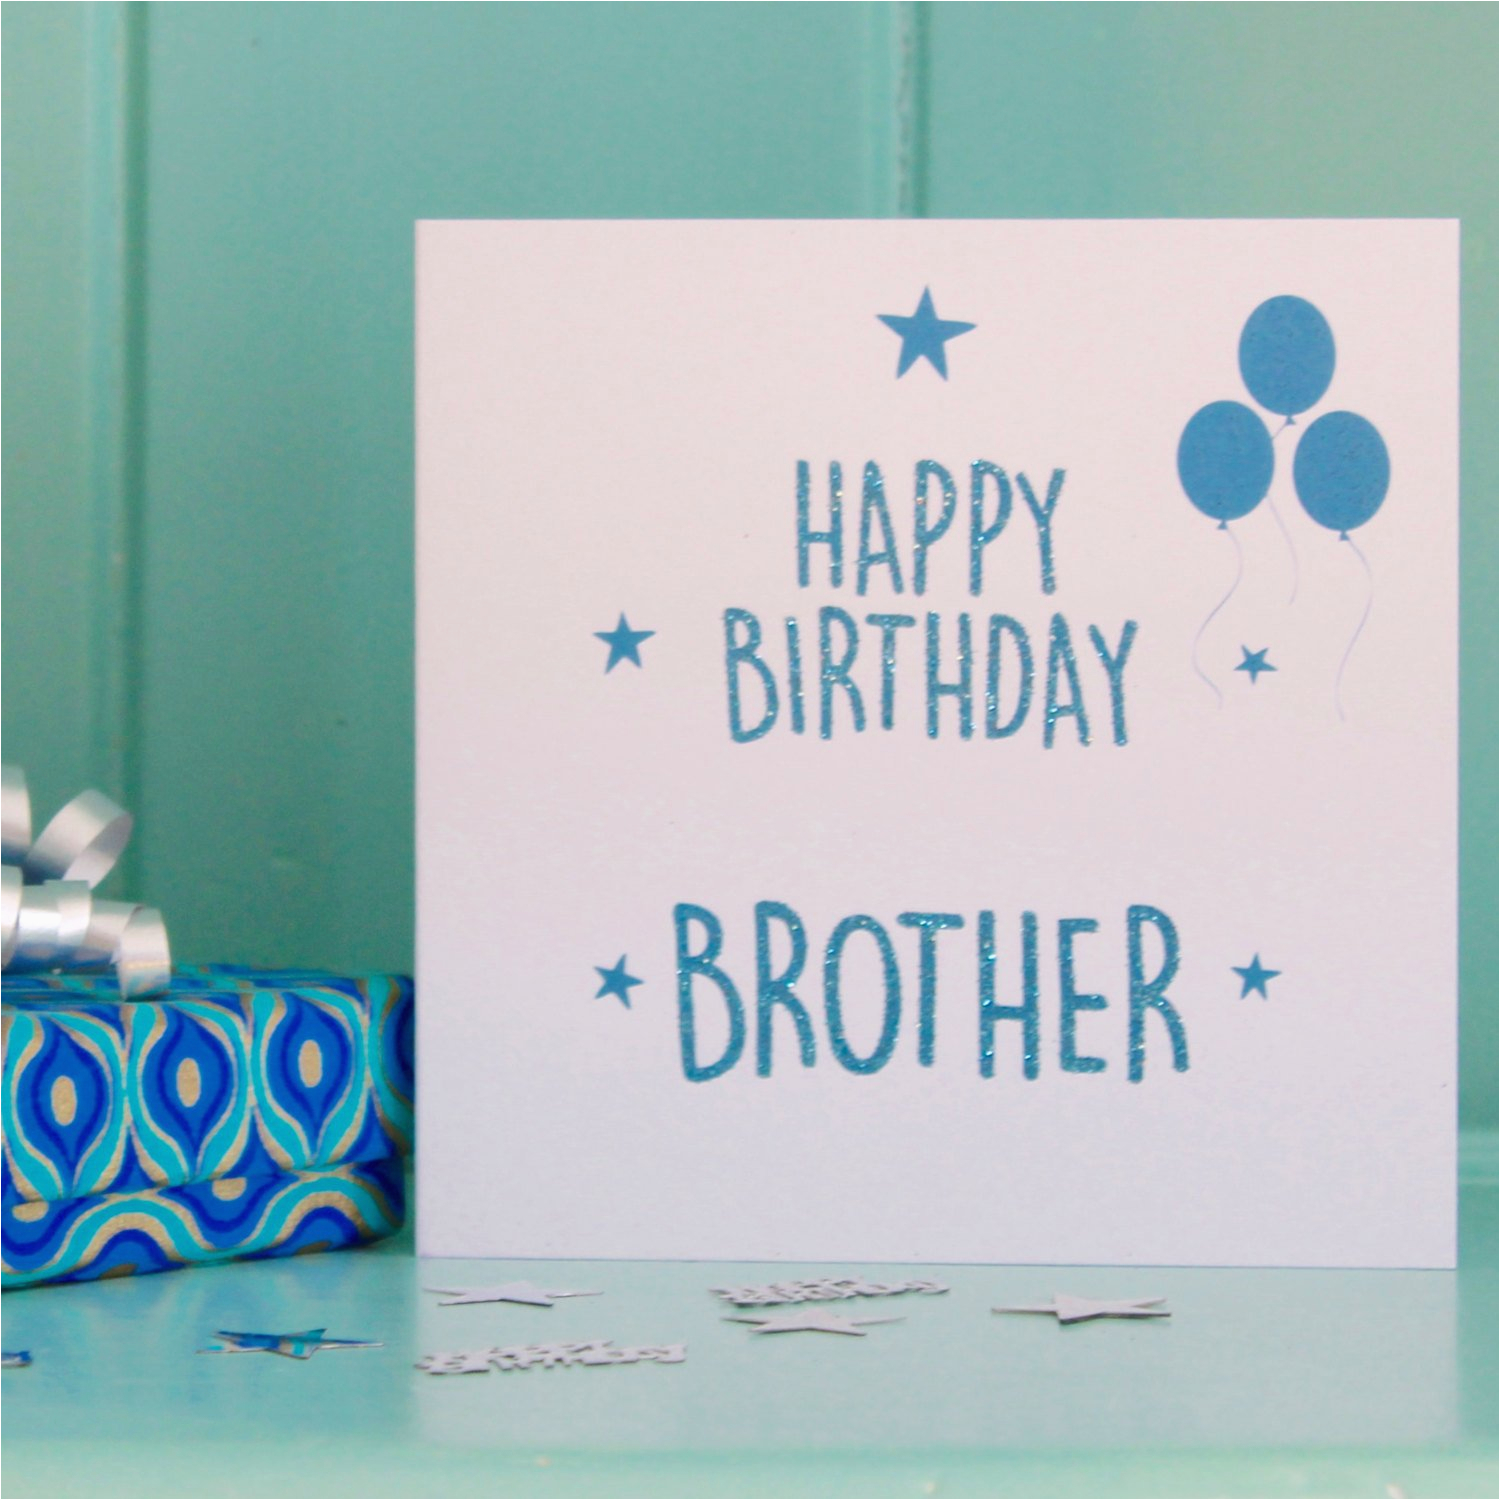 Birthday Cards for Little Brother Brother Birthday Card Brov Bro Big Brother Little Bro